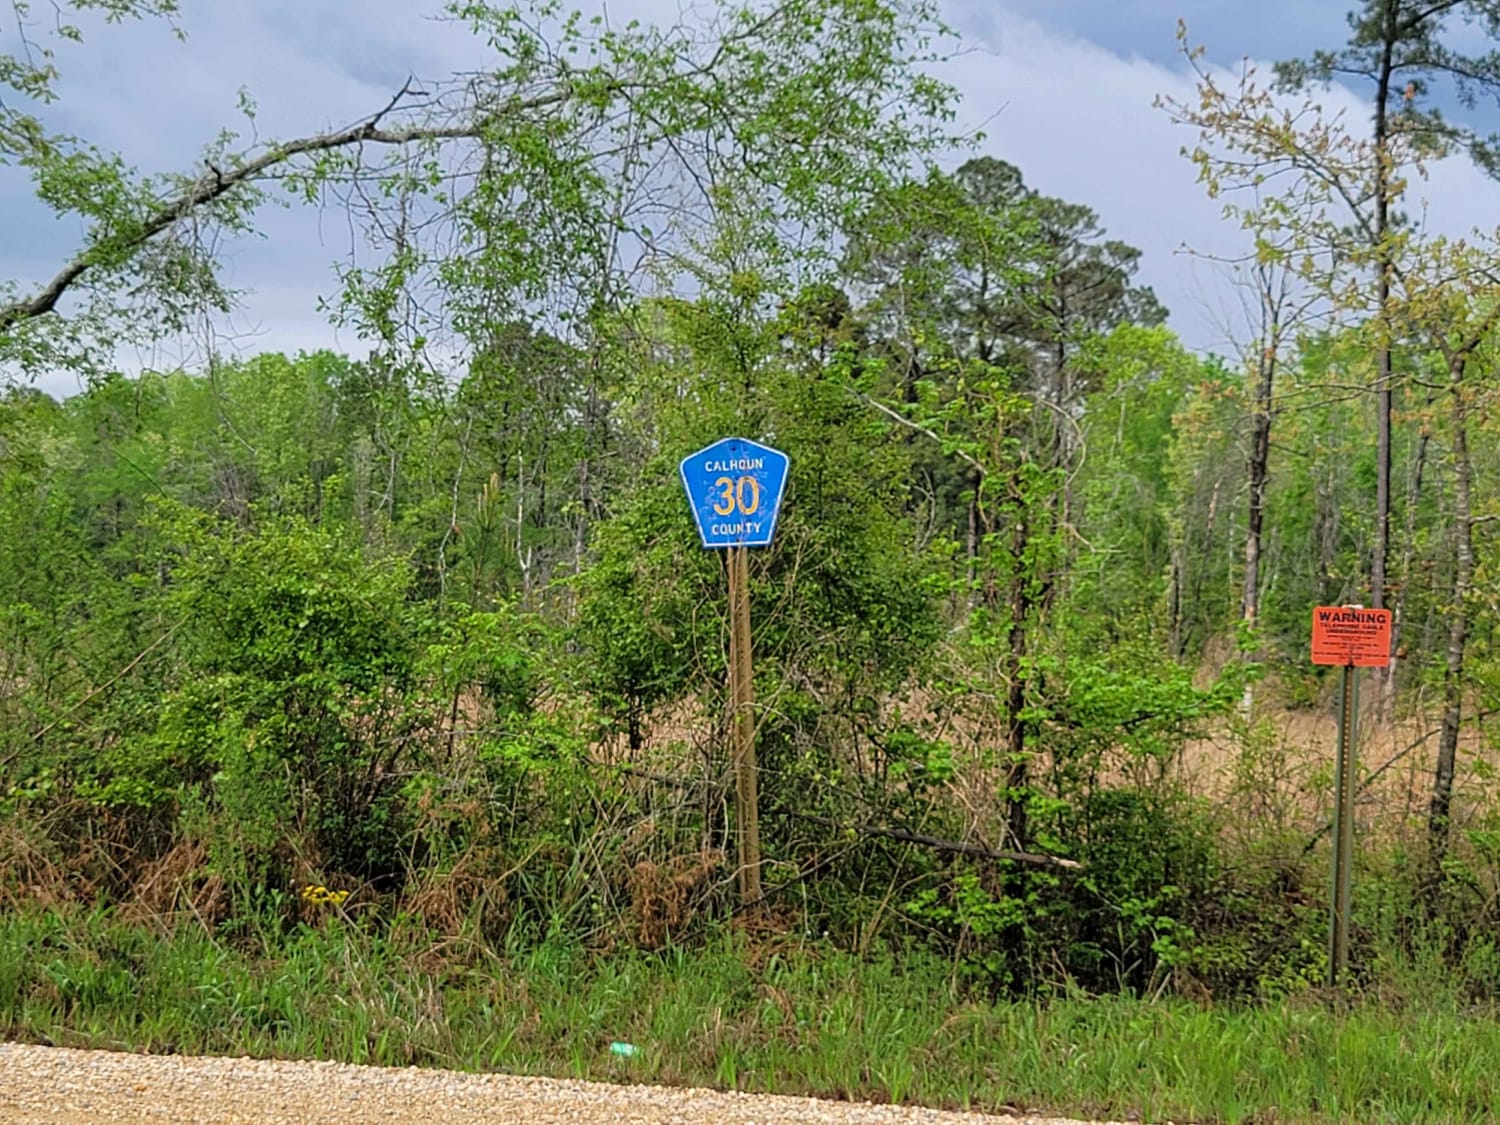 The Arkansas Overland Route - Section 11 - County Road 30 and 32